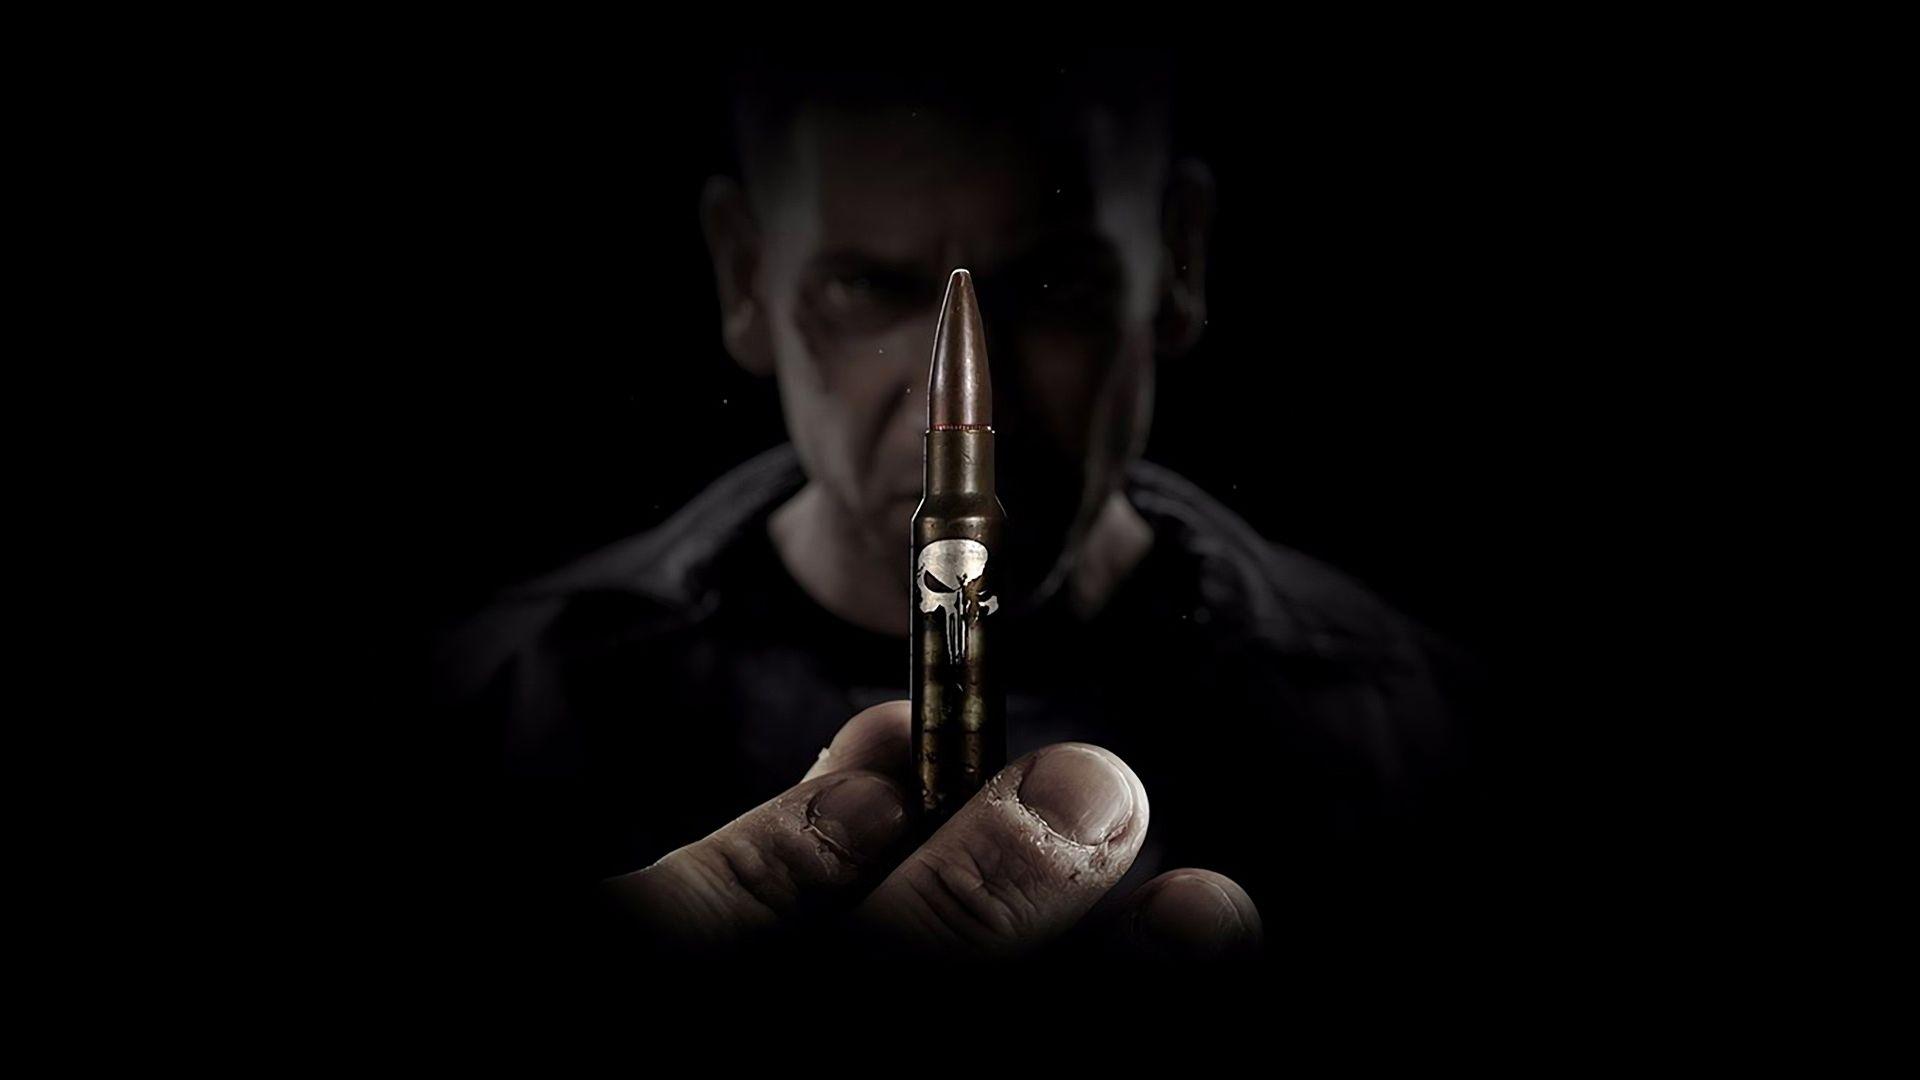 The Punisher [TV Series]